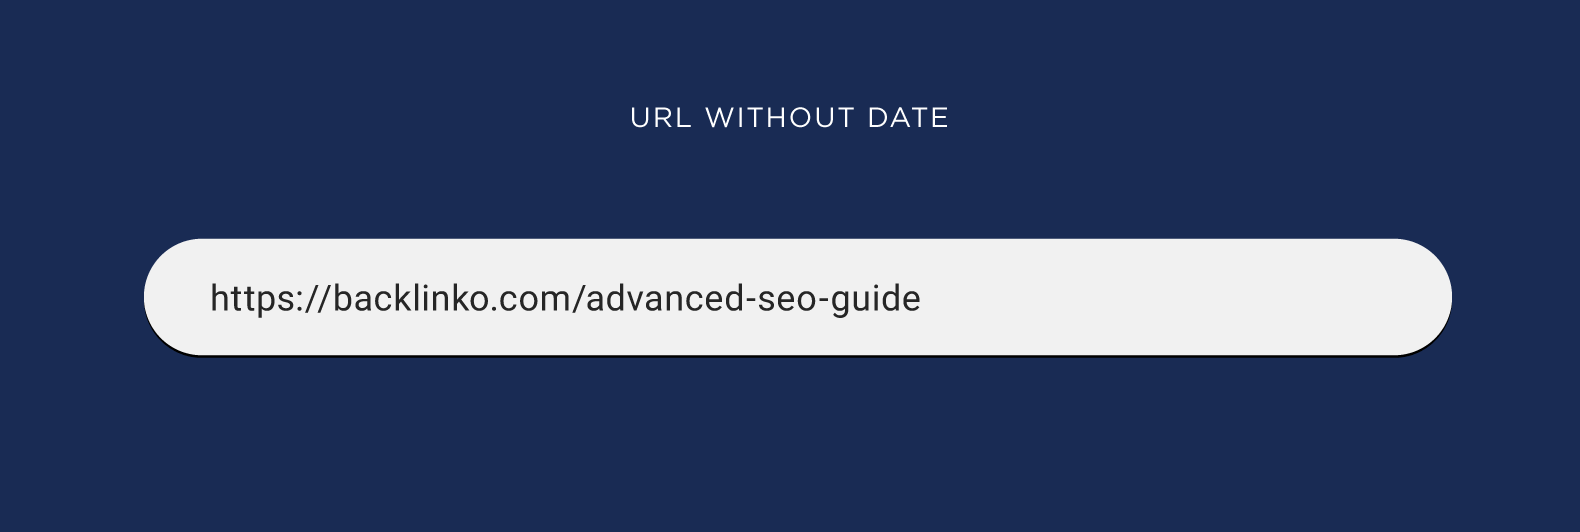 URL without date